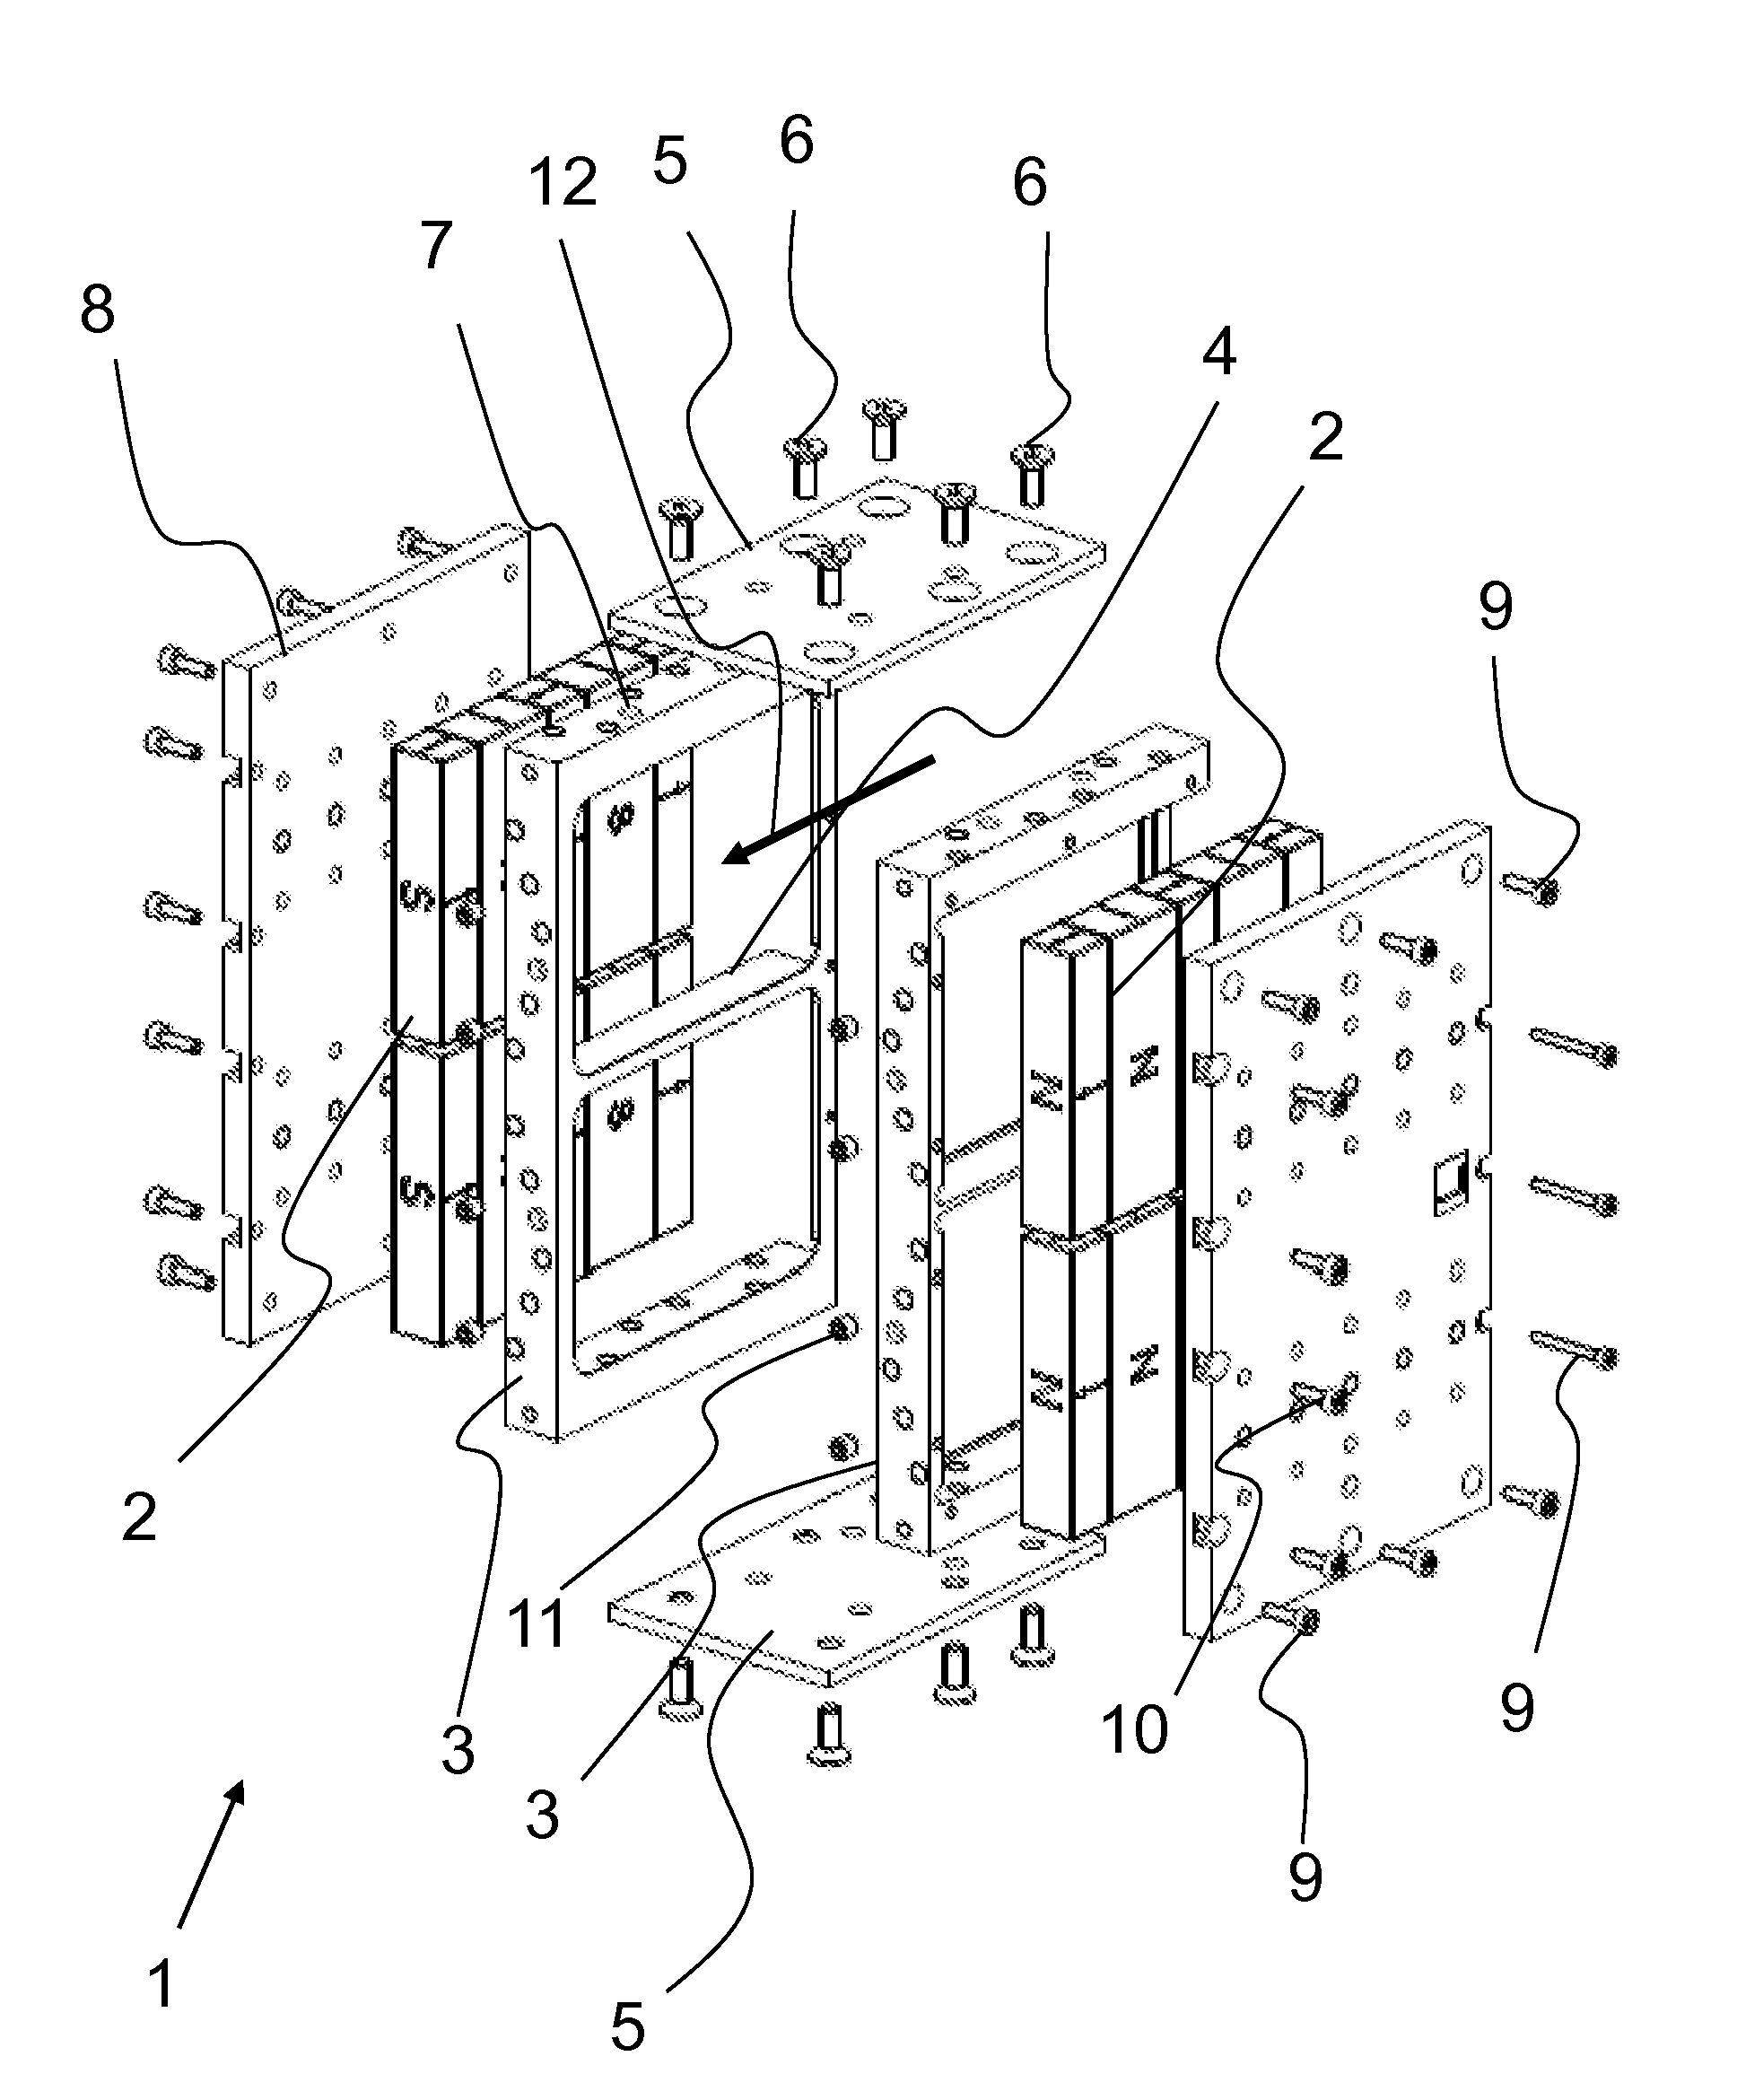 Magnetic Actor and a Method for its Installation